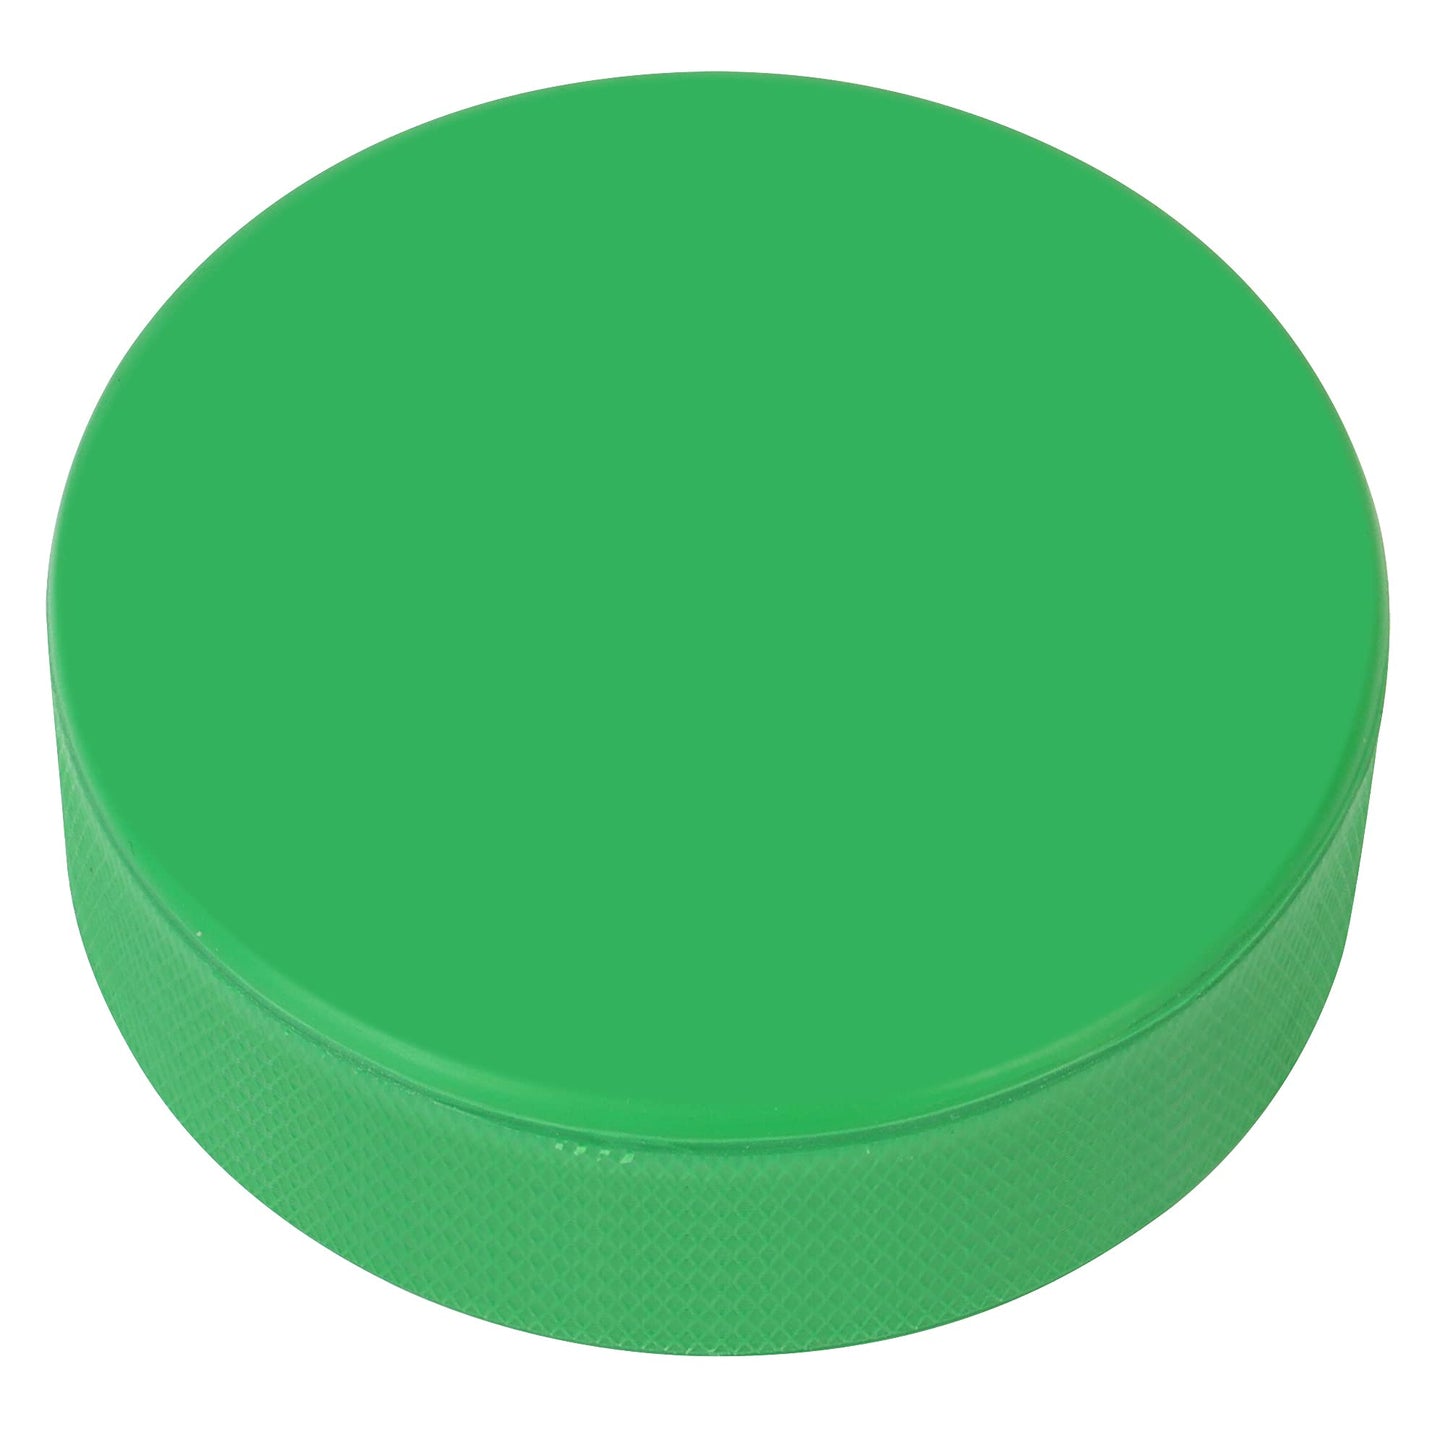 Ice Hockey Pucks, for Goalkeeper and Junior Group, 4.5oz, Diameter 3", Thickness 1", Green